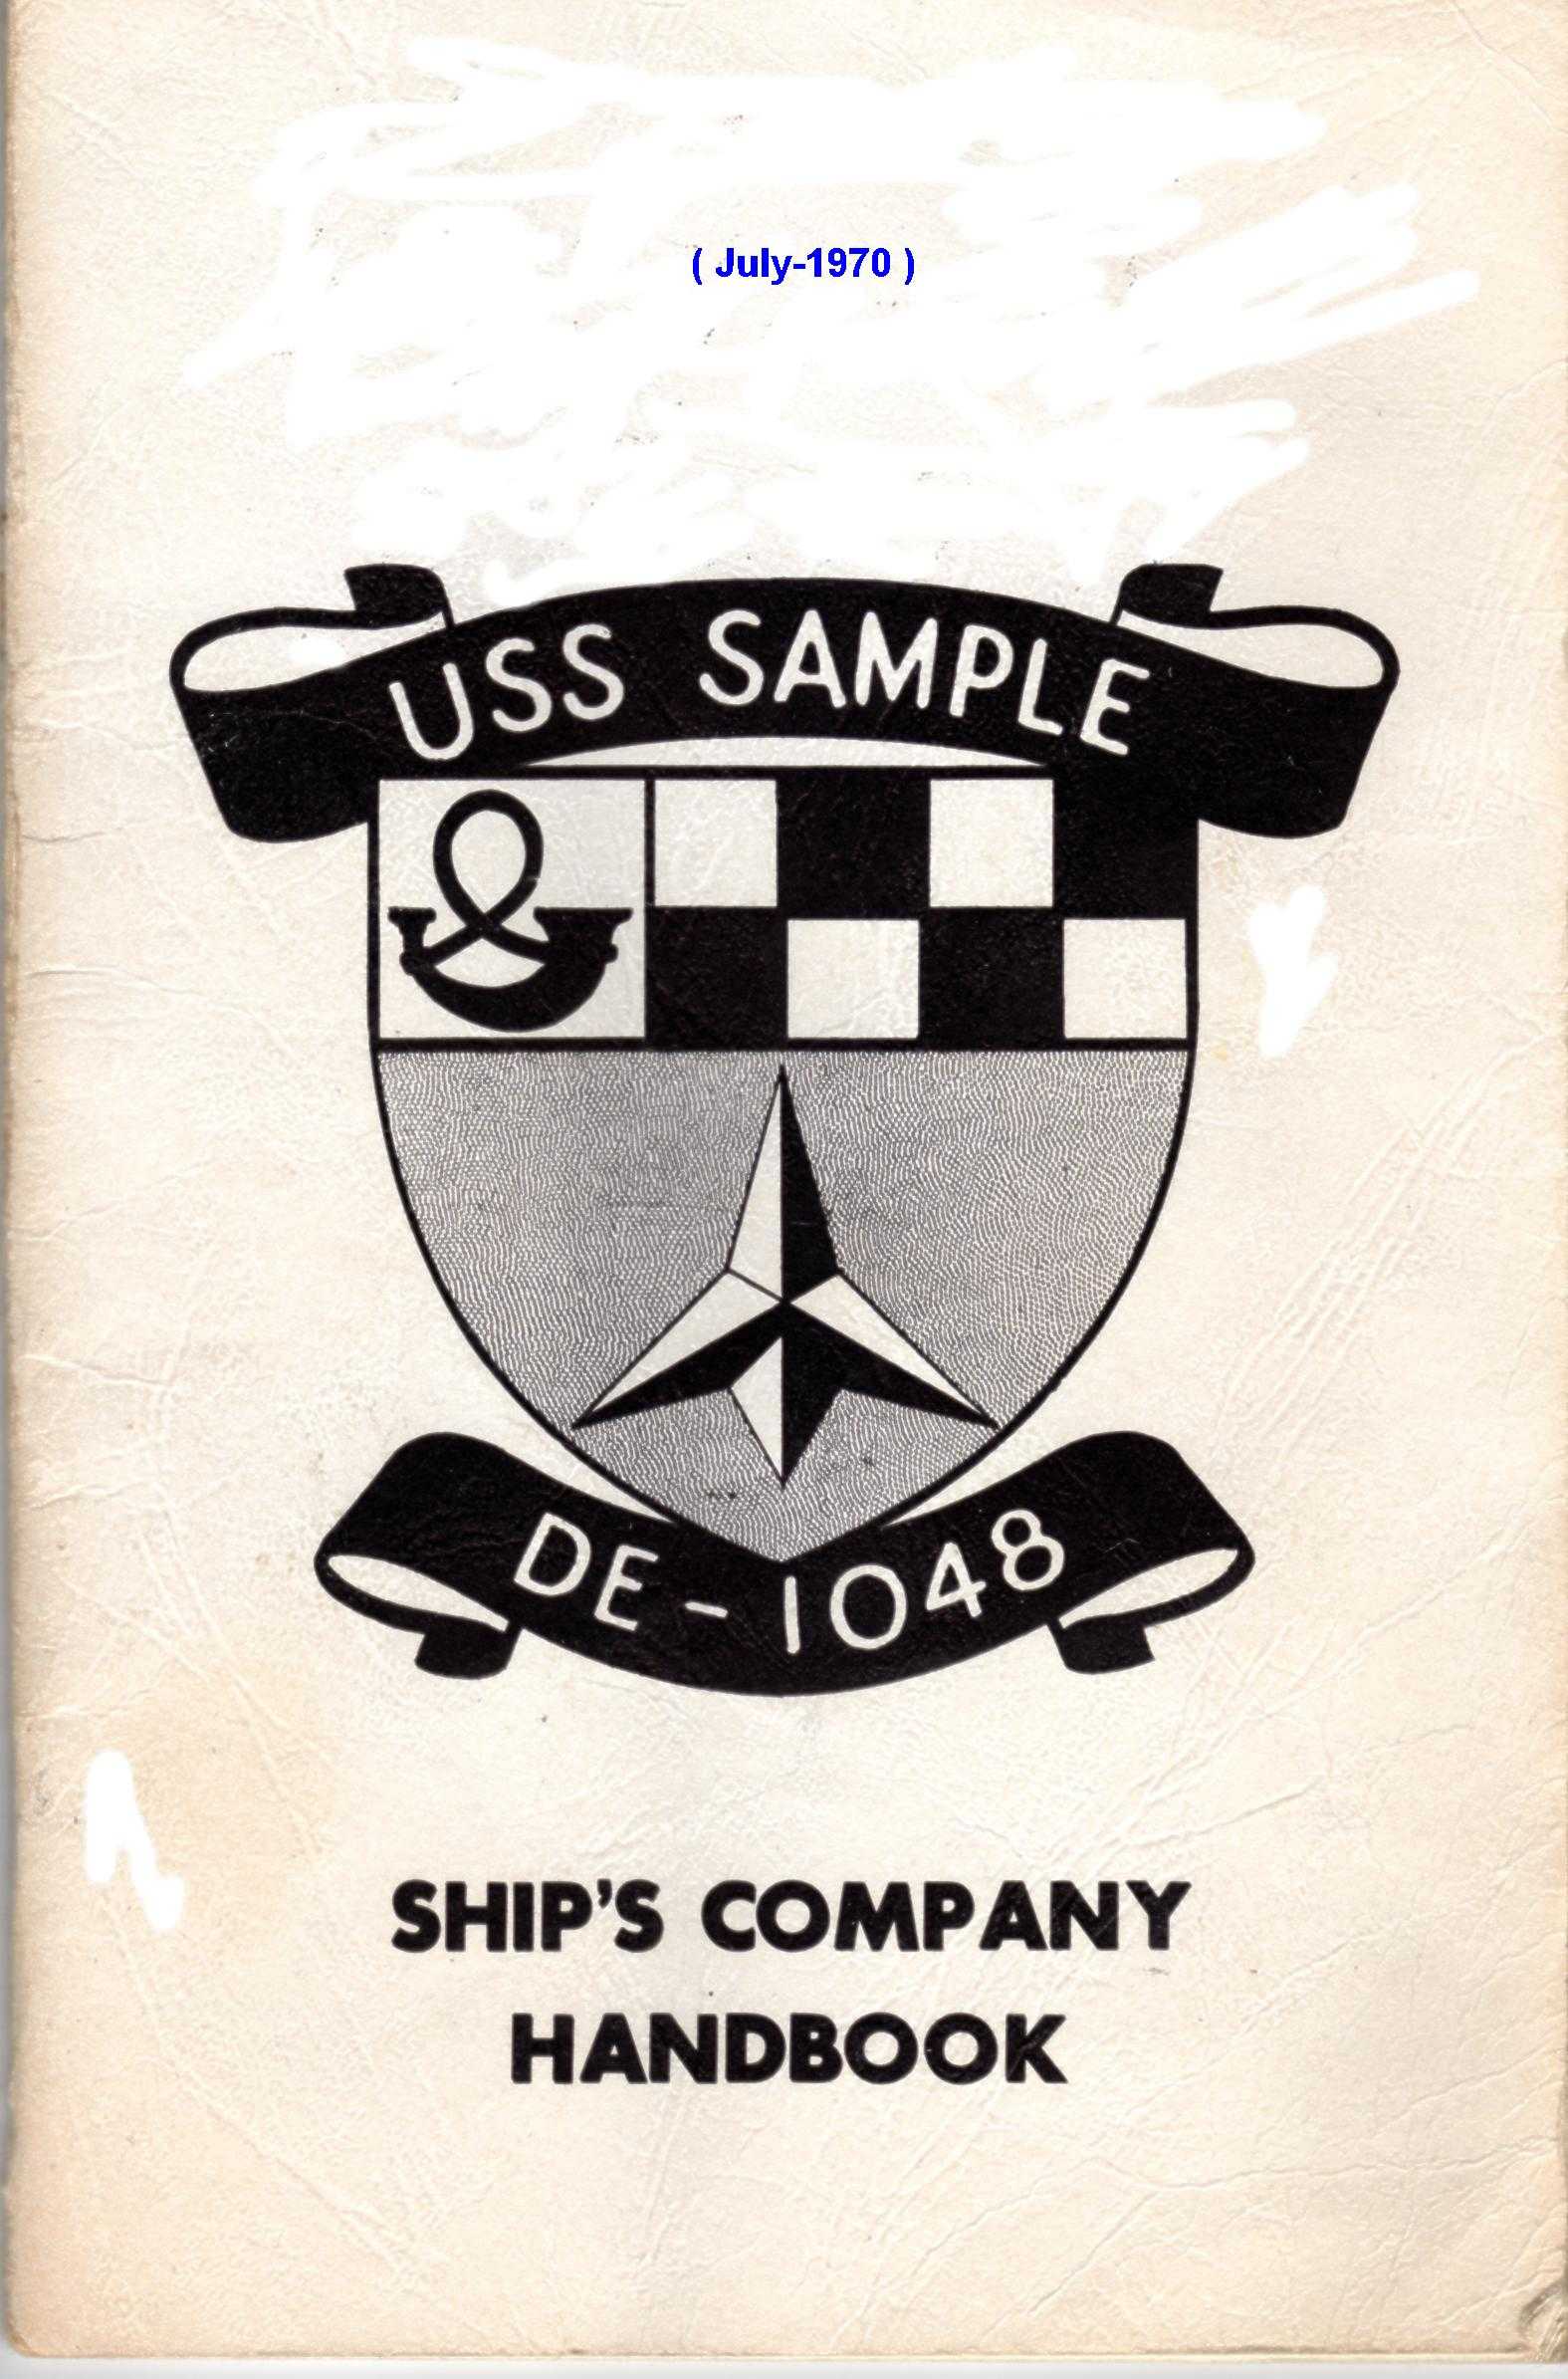 Cover of the USS Sample Ships Operations Manual